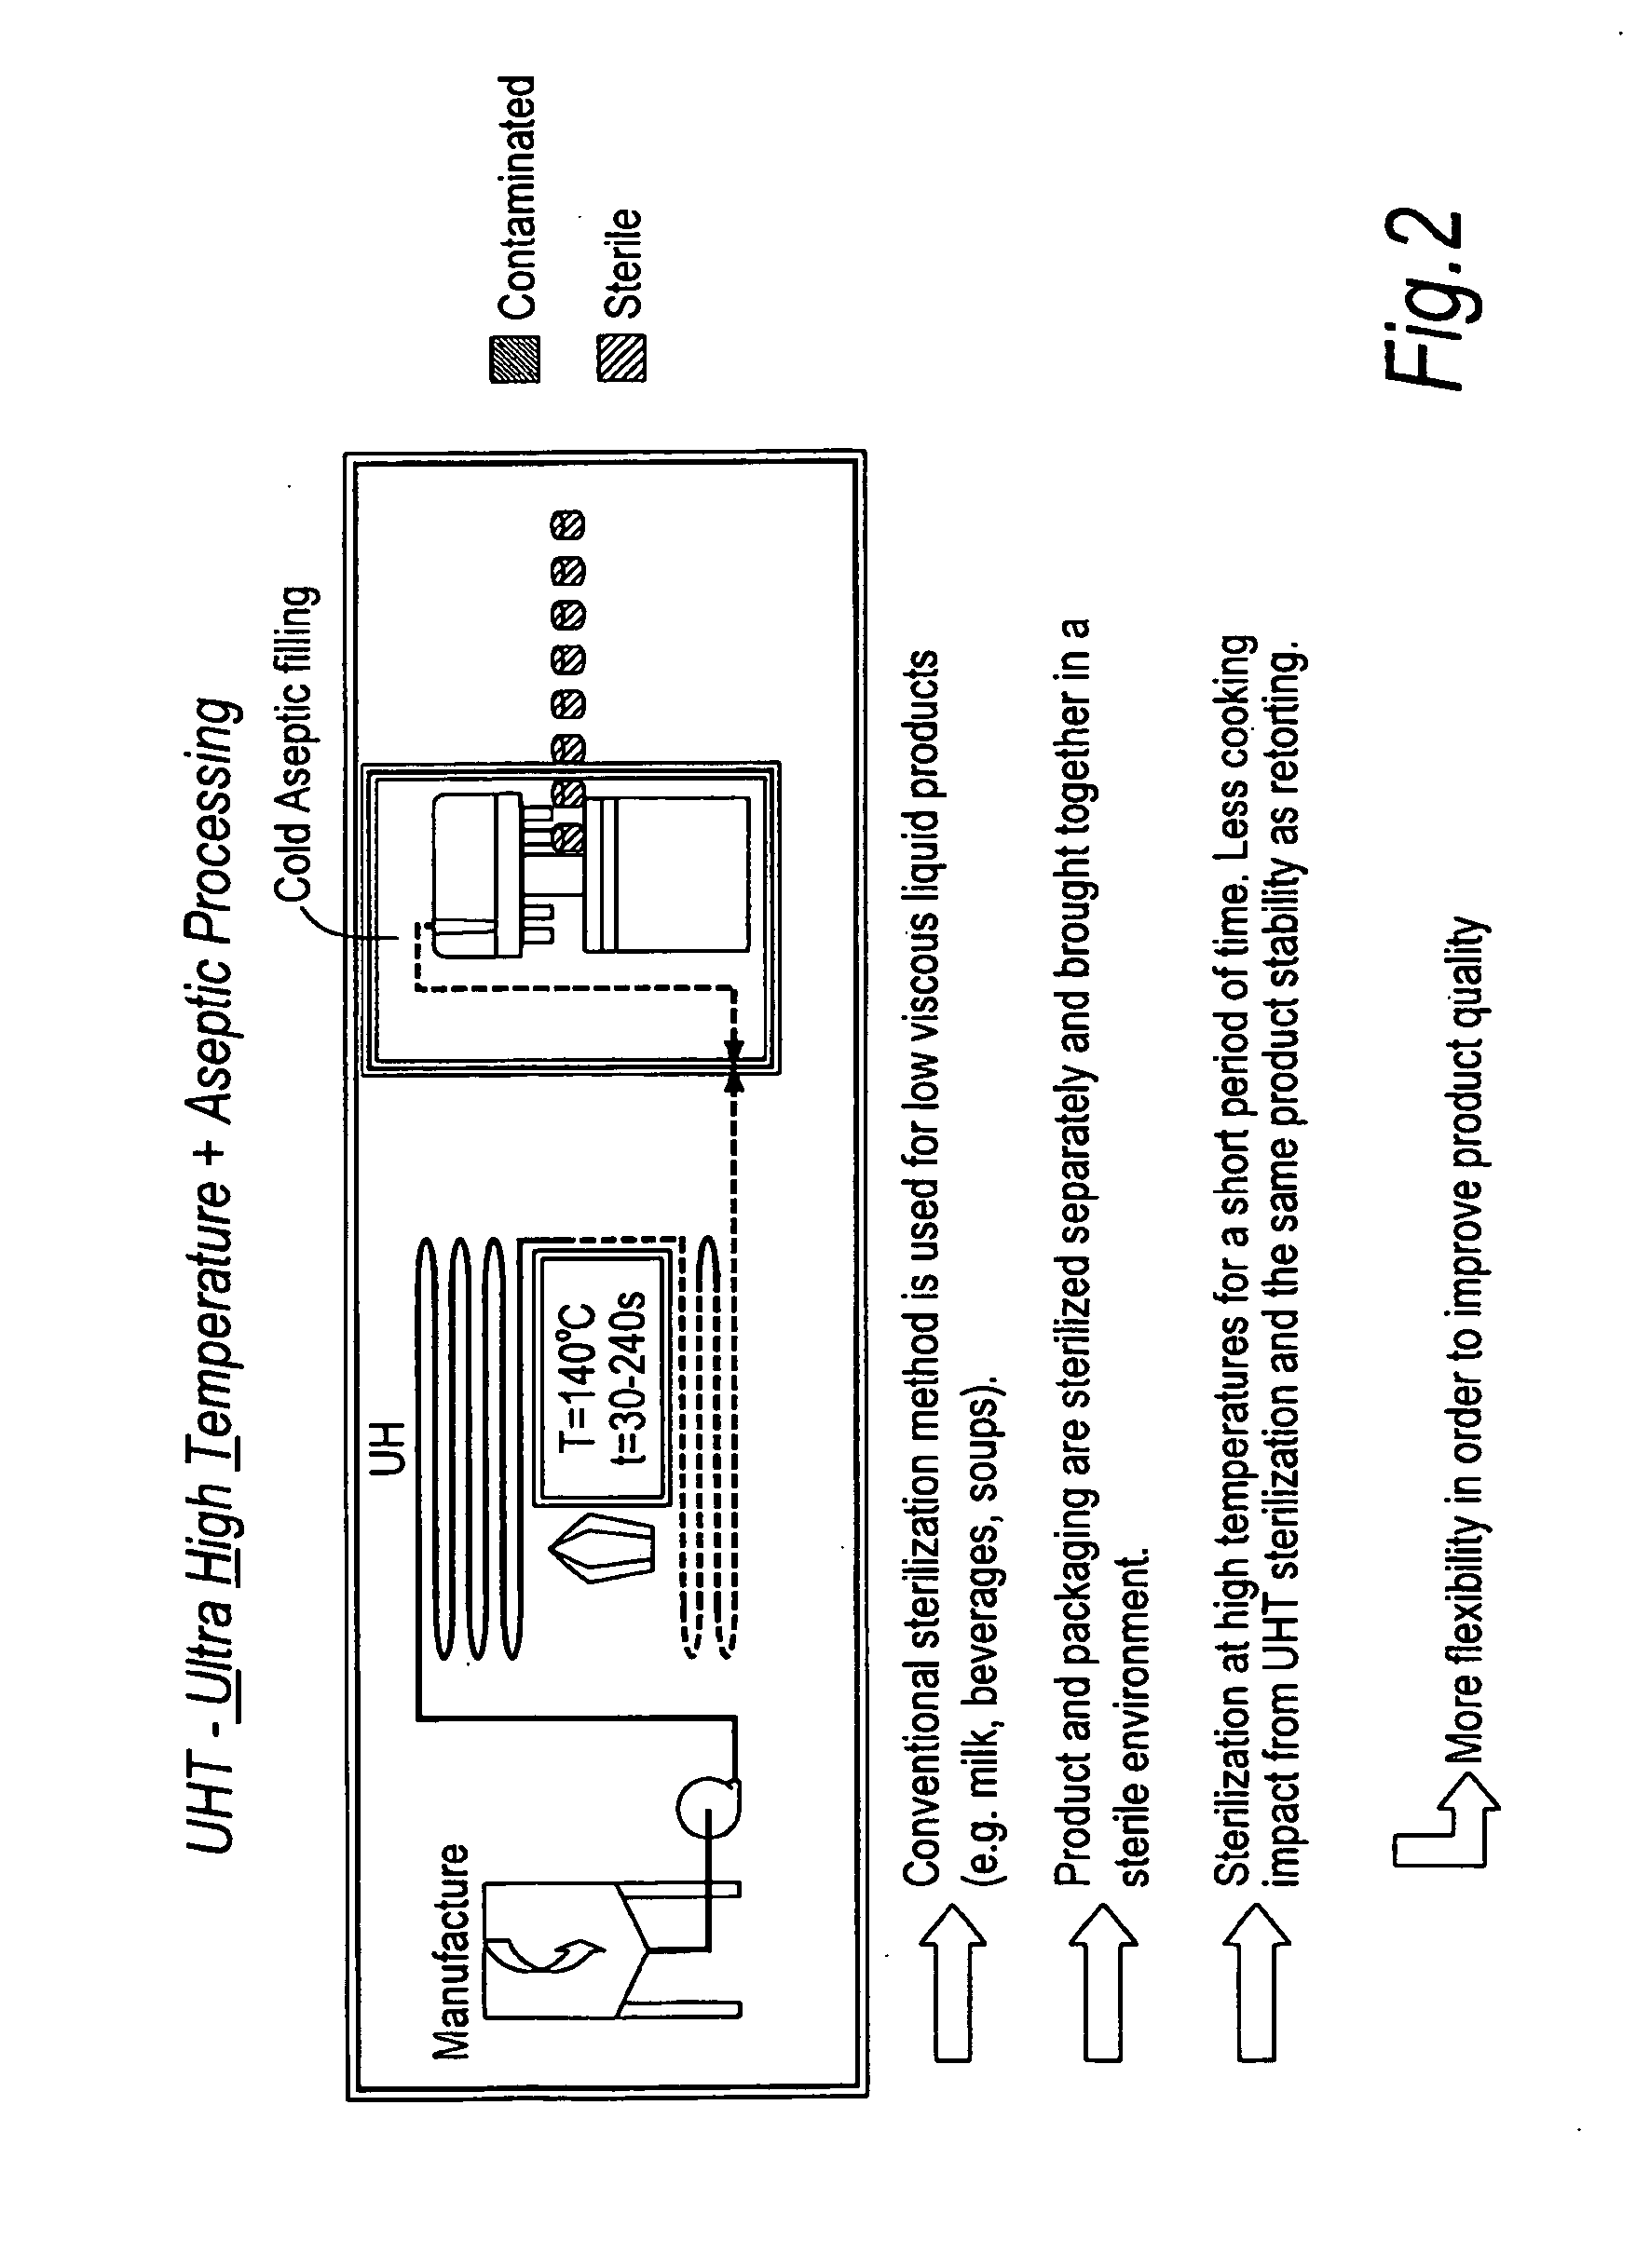 Process for producing infant food products